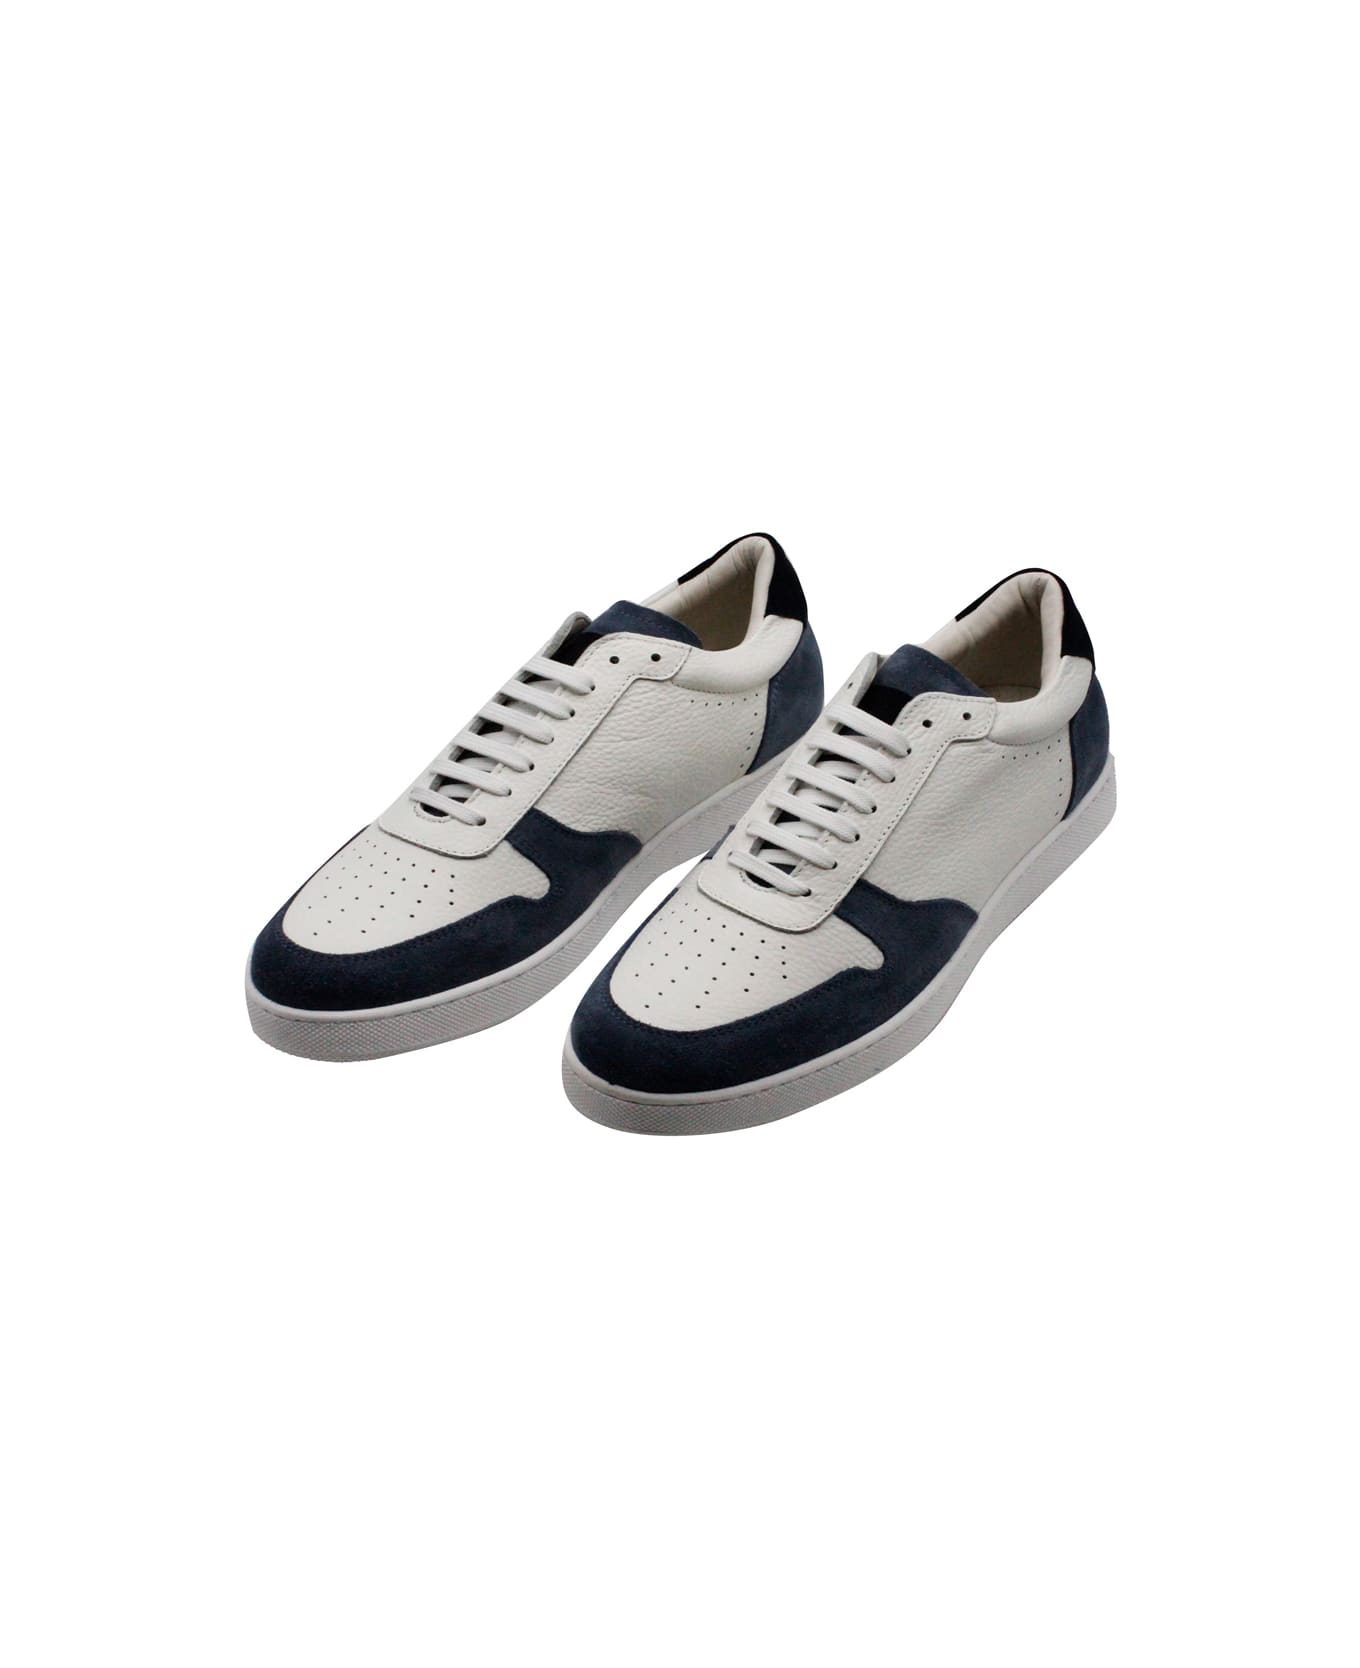 Barba Napoli Sneakers In Soft And Fine Leather With Contrasting Color Suede Details With Lace Closure And Suede Back - Light Blu スニーカー